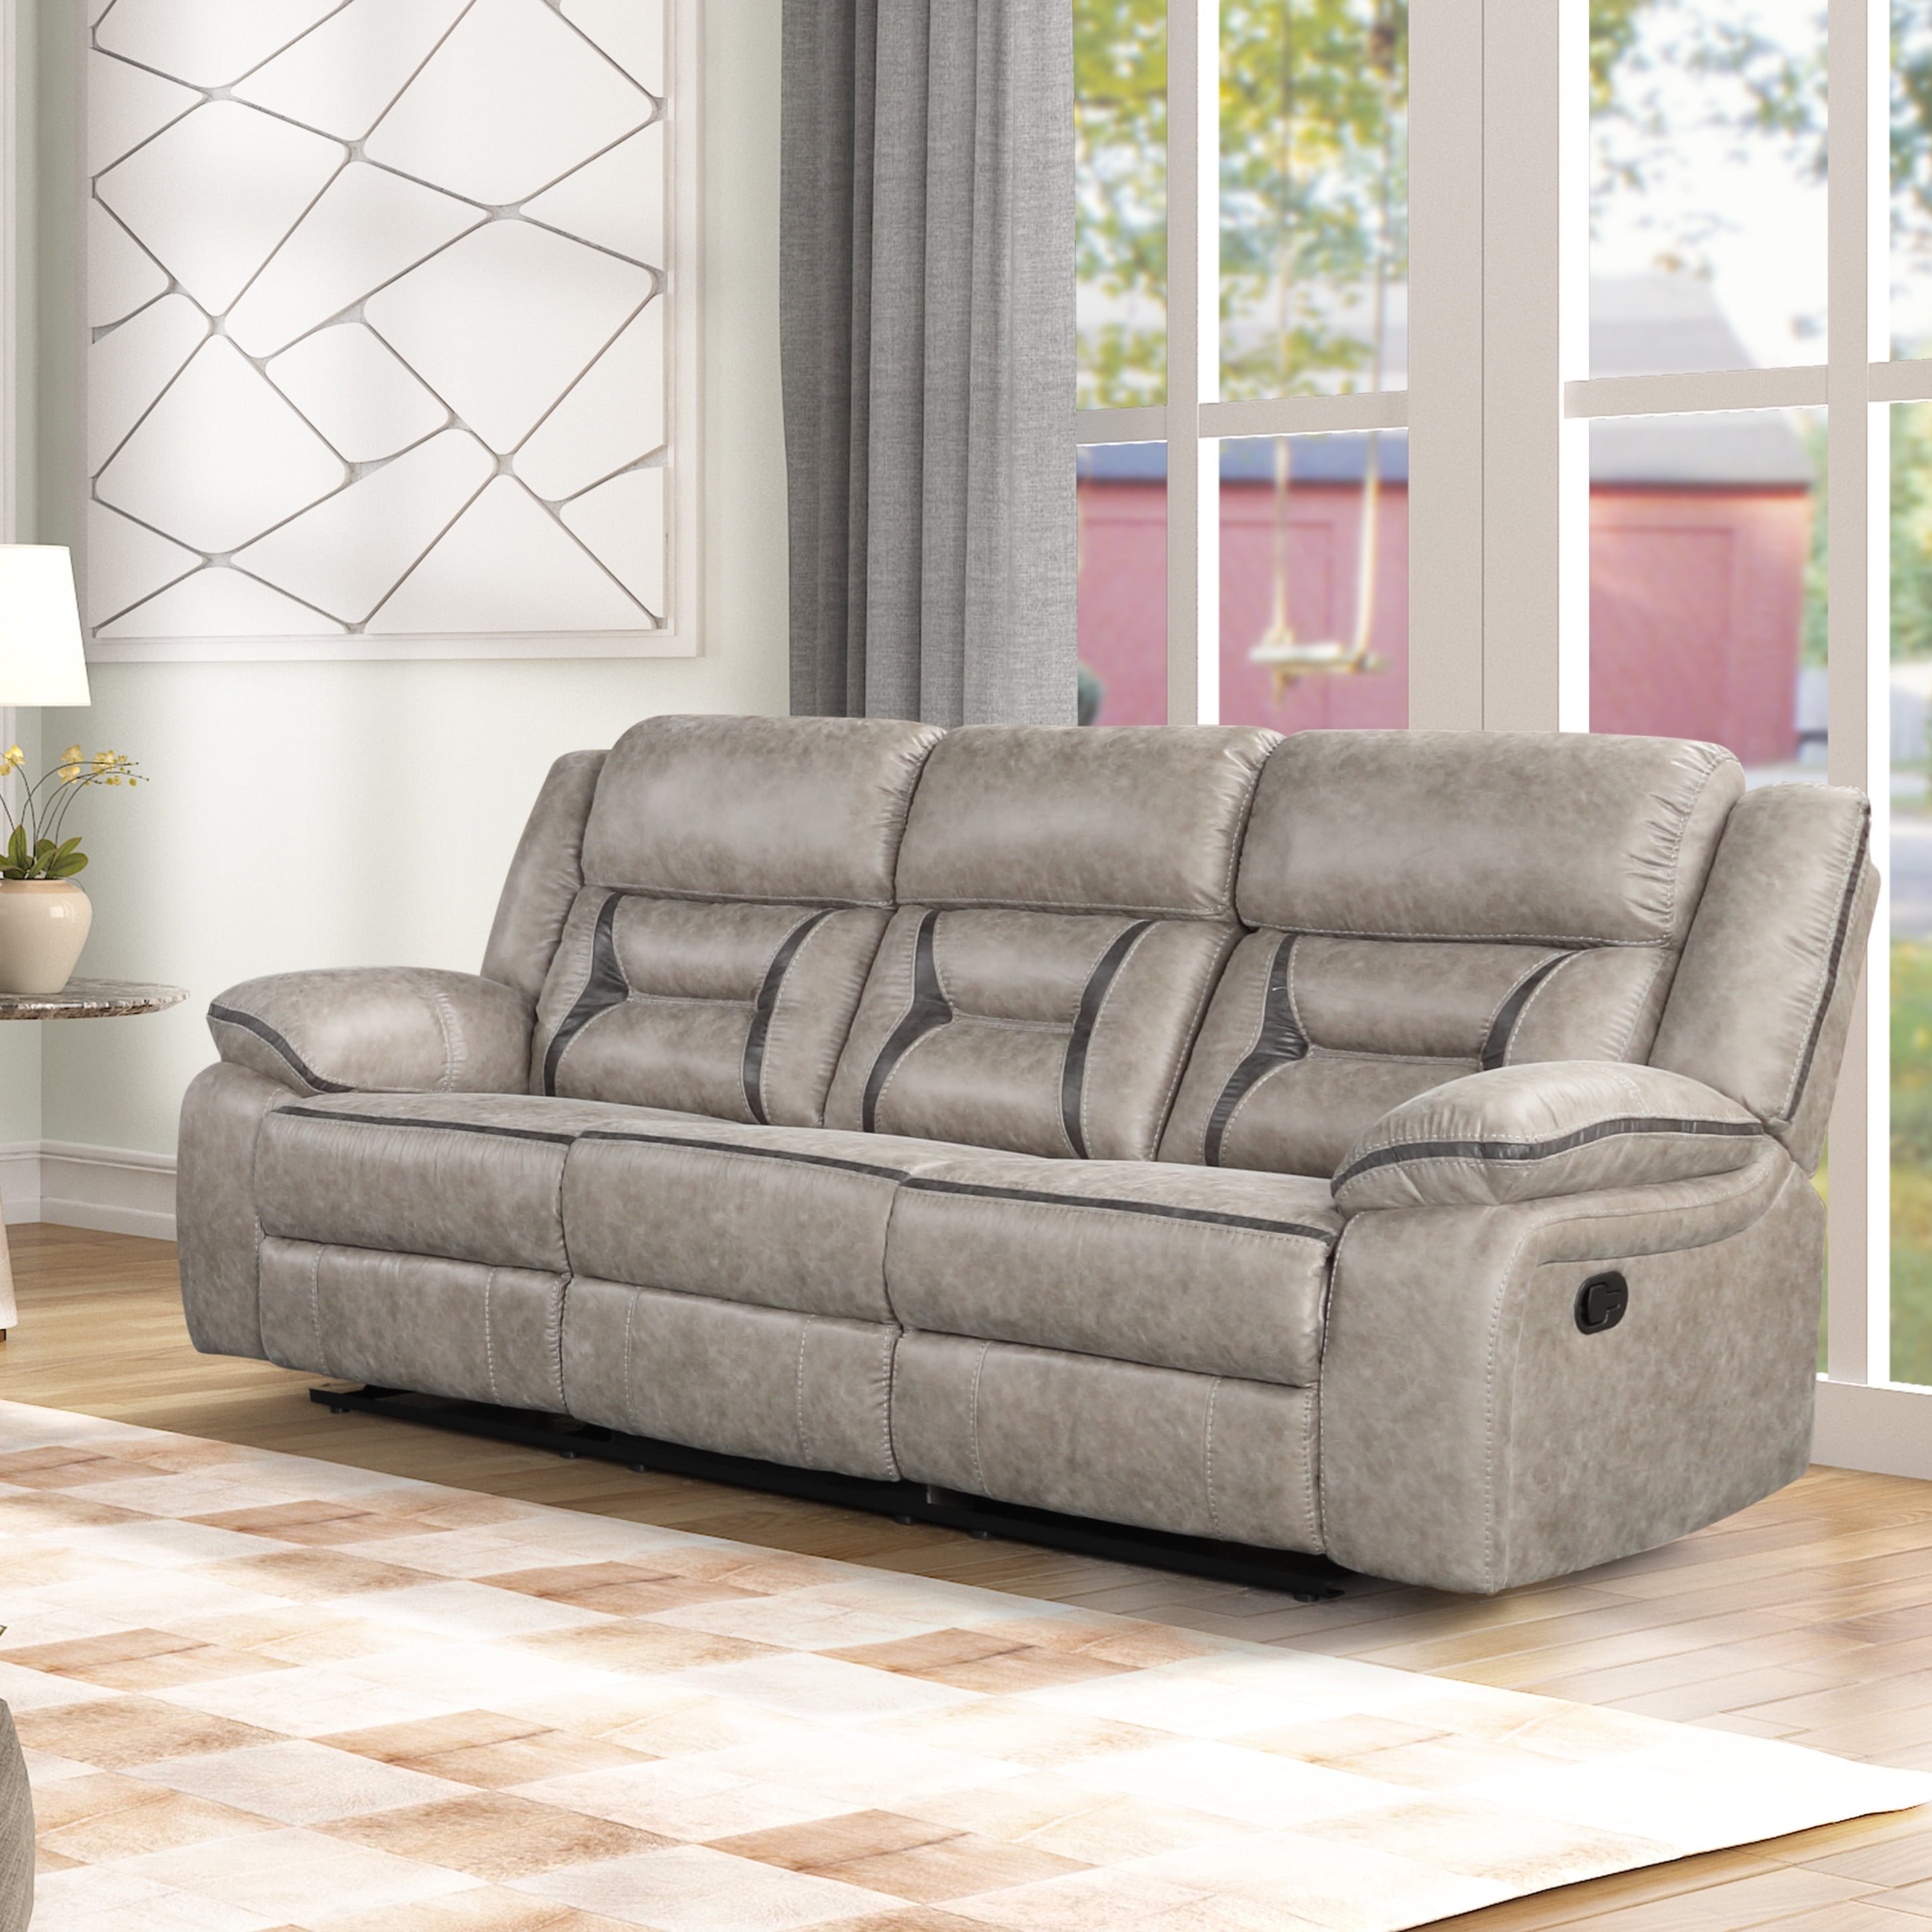 Elkton Manual Motion Reclining Sofa, What Does Sofas Mean In Nutrition